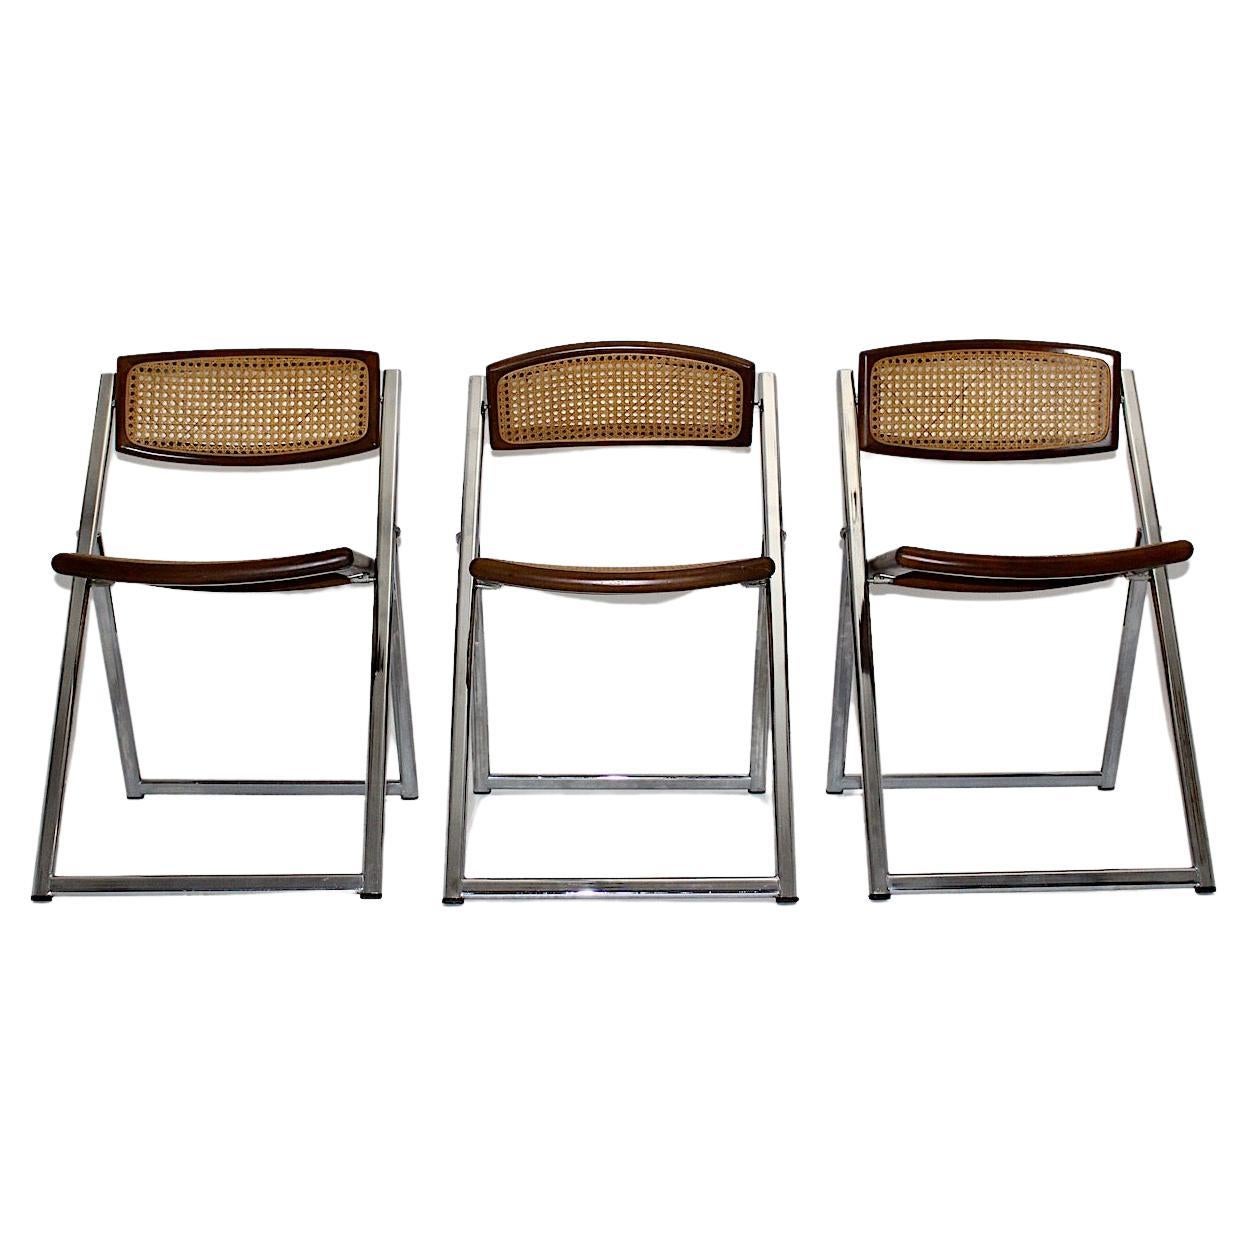 Modernist Organic Vintage Three Foldable Dining Chairs Beech Mesh Chrome, 1970s For Sale